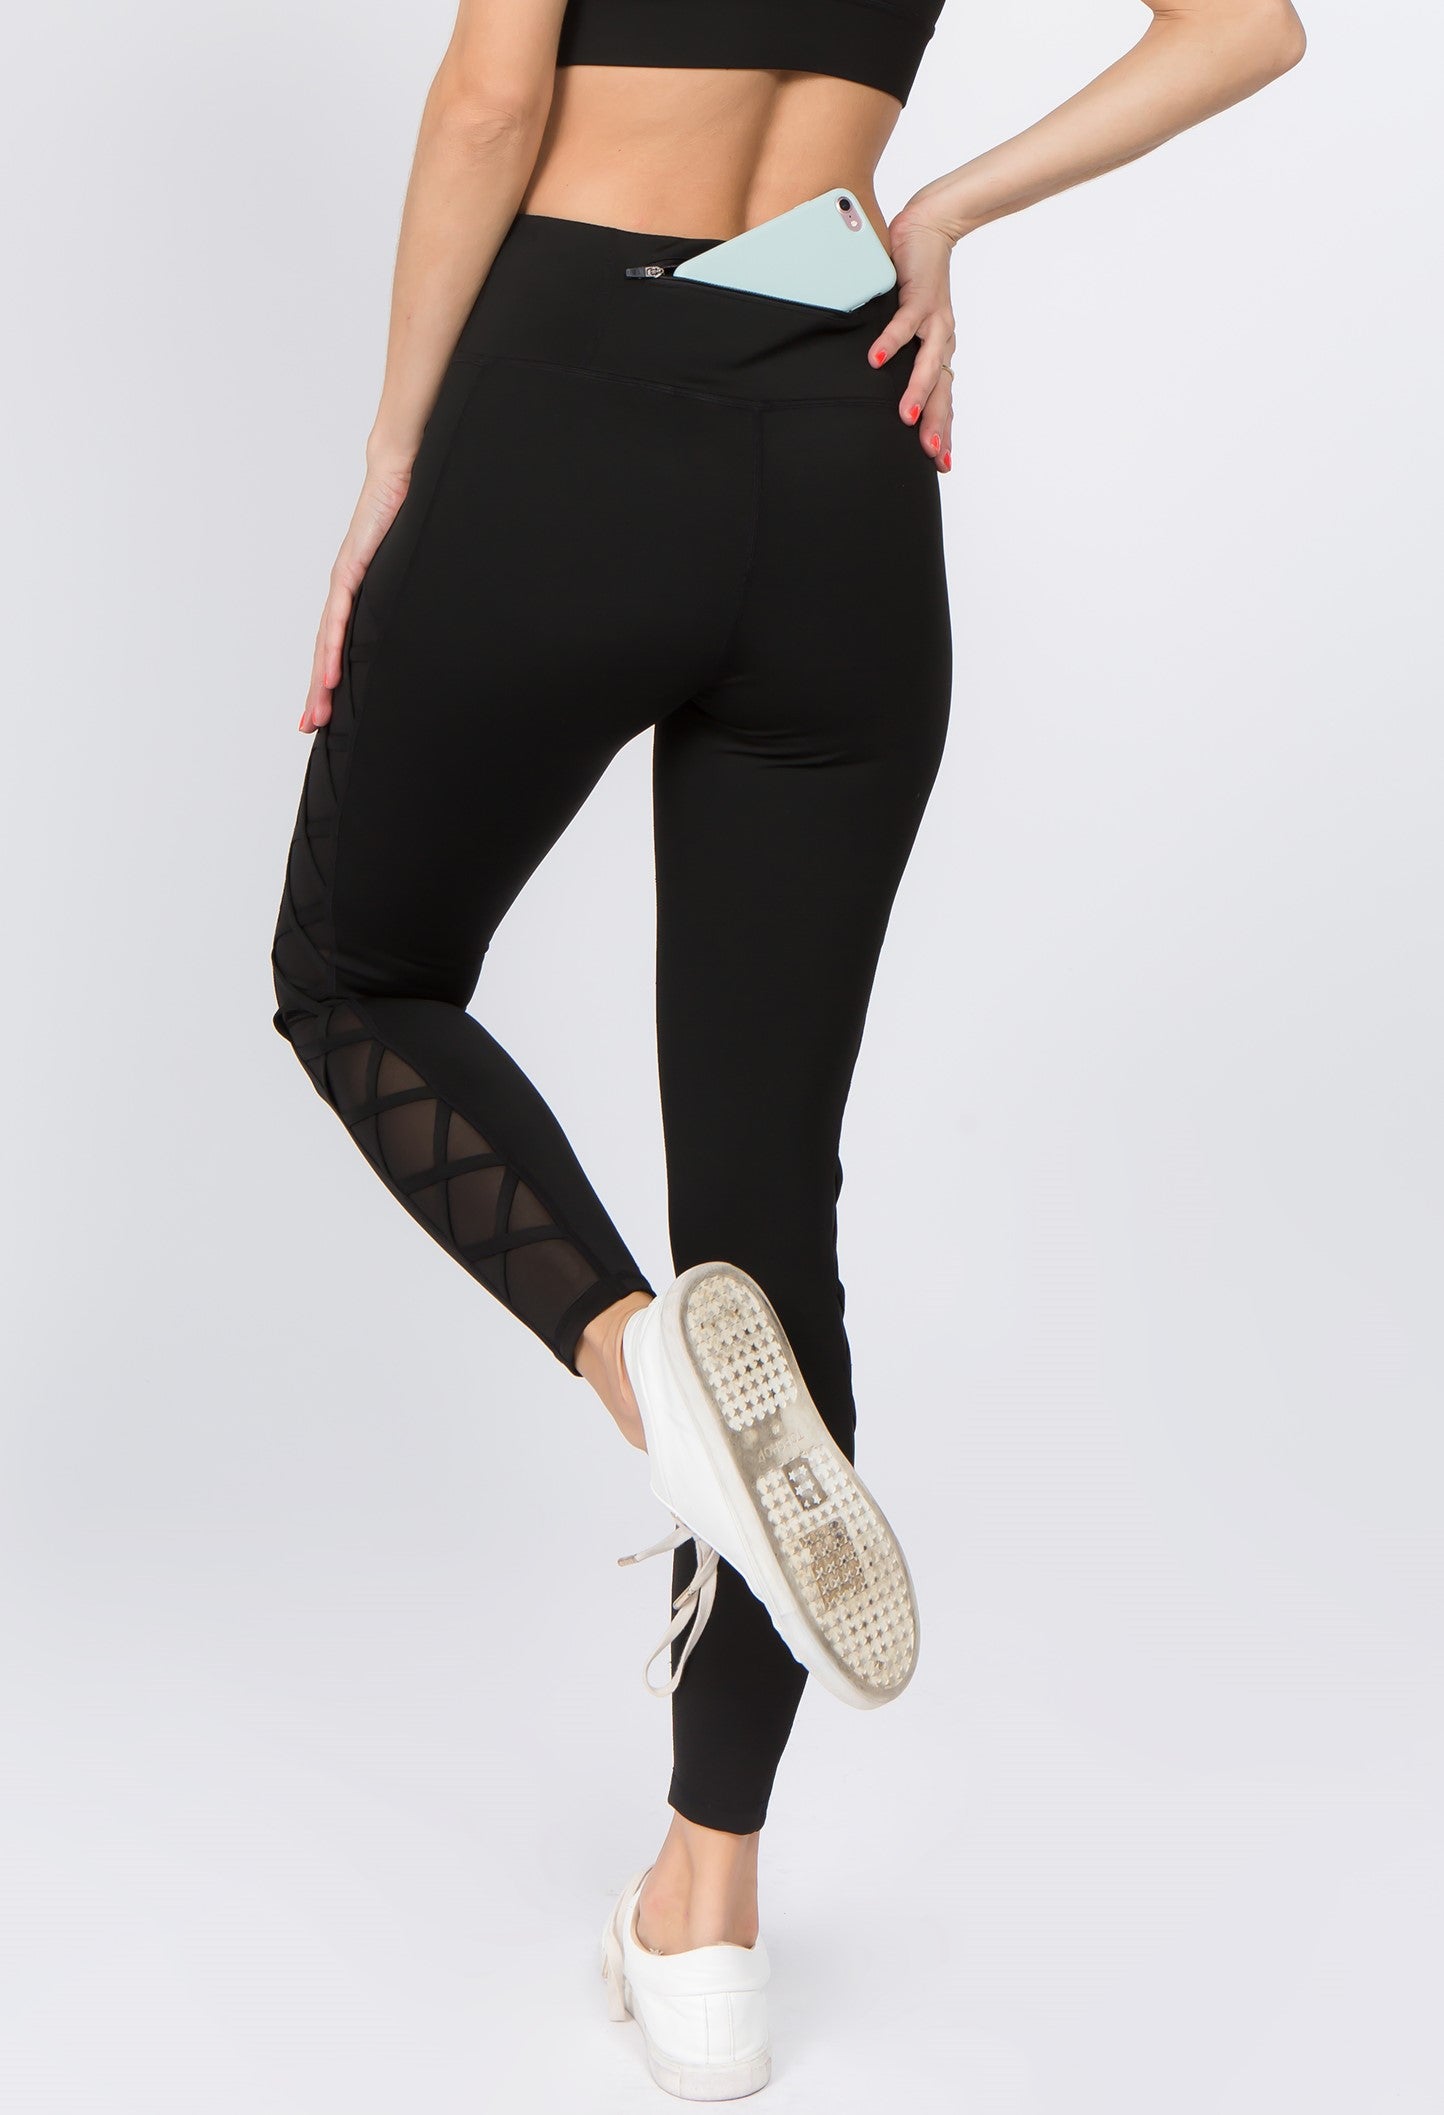 Lace Up Active Mesh Workout Pocket Leggings  Ropa fitness mujer, Ropa  deportiva mujer, Ropa fitness